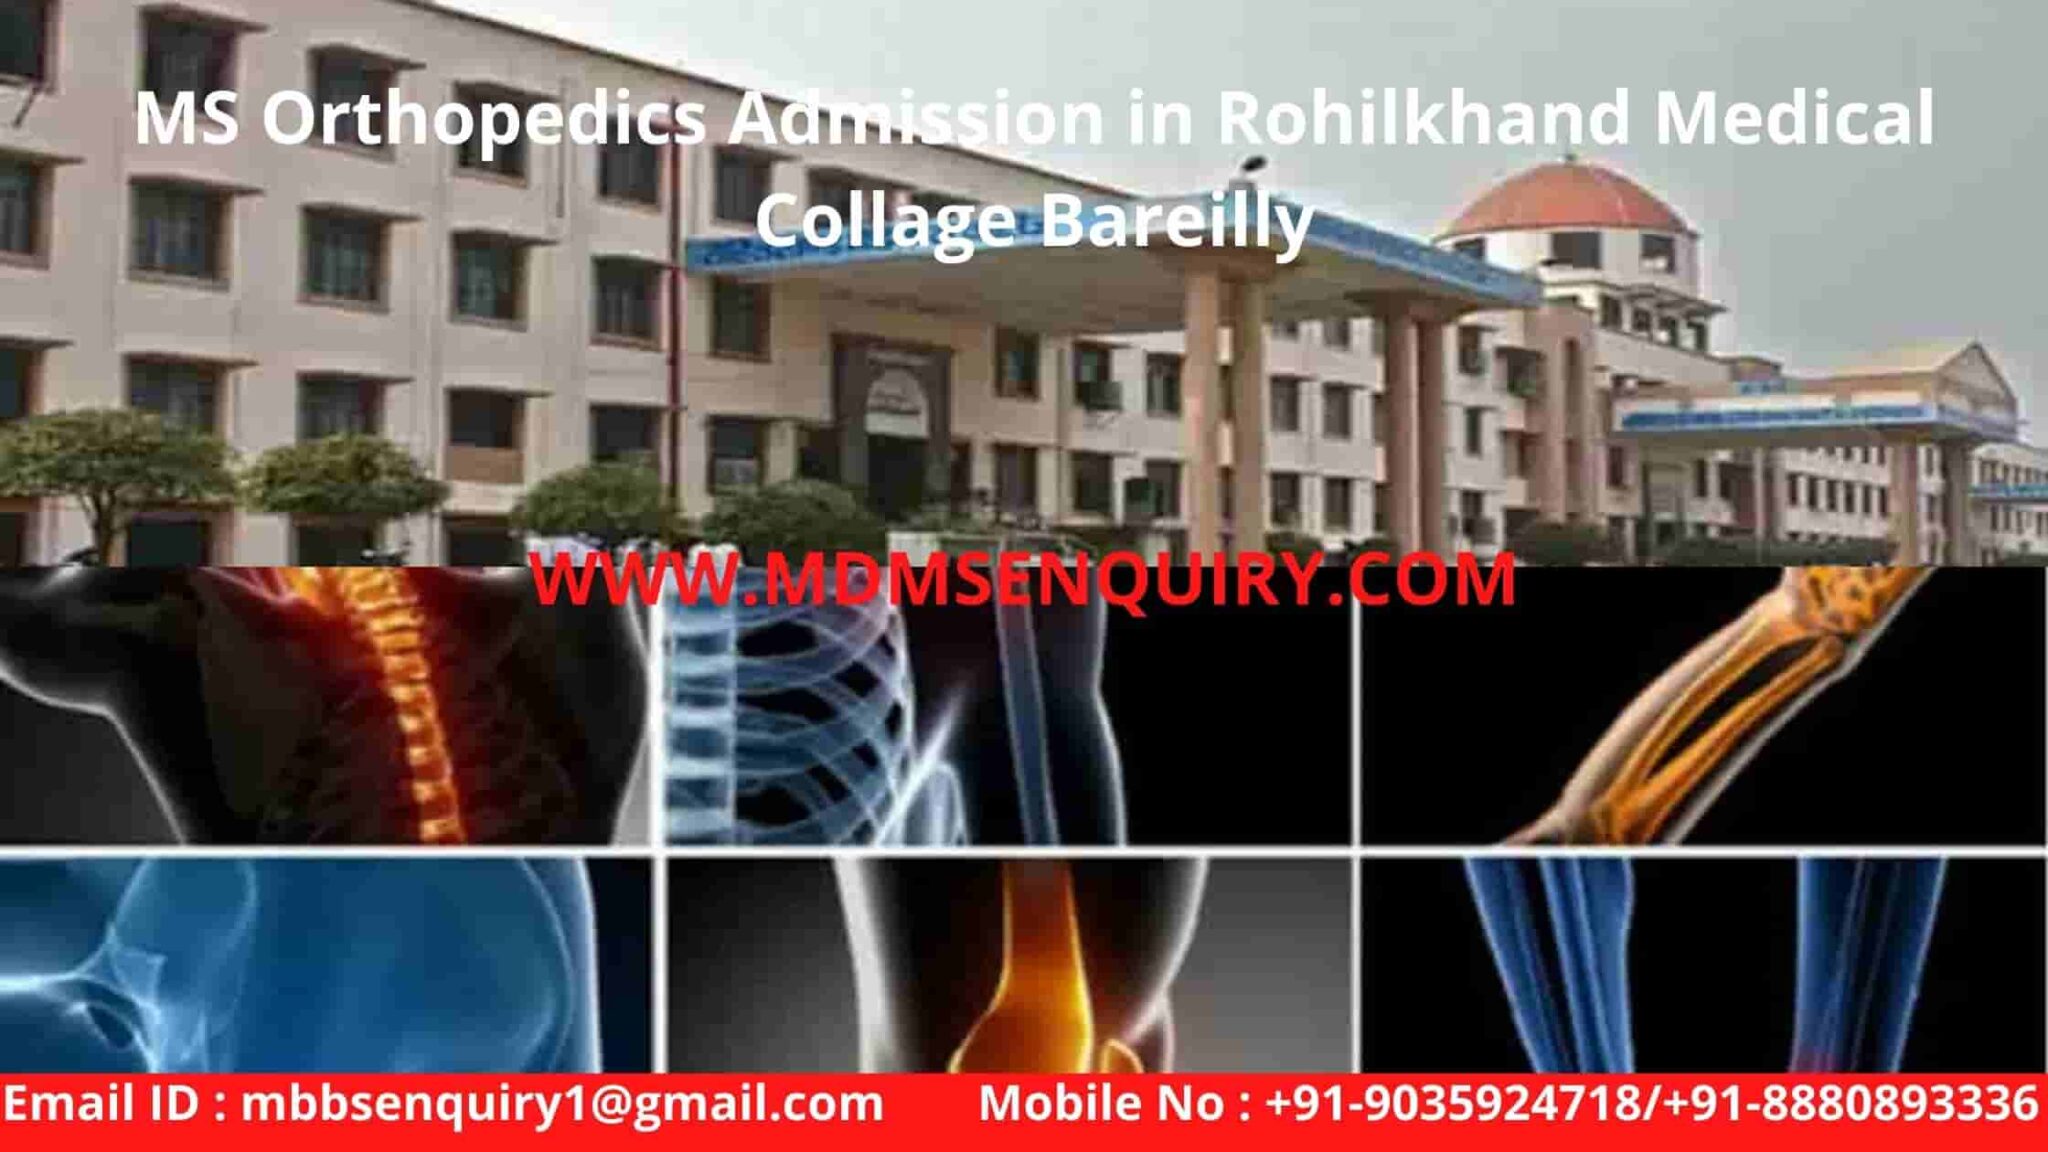 MS Orthopaedics Admission in Rohilkhand Medical College Bareilly